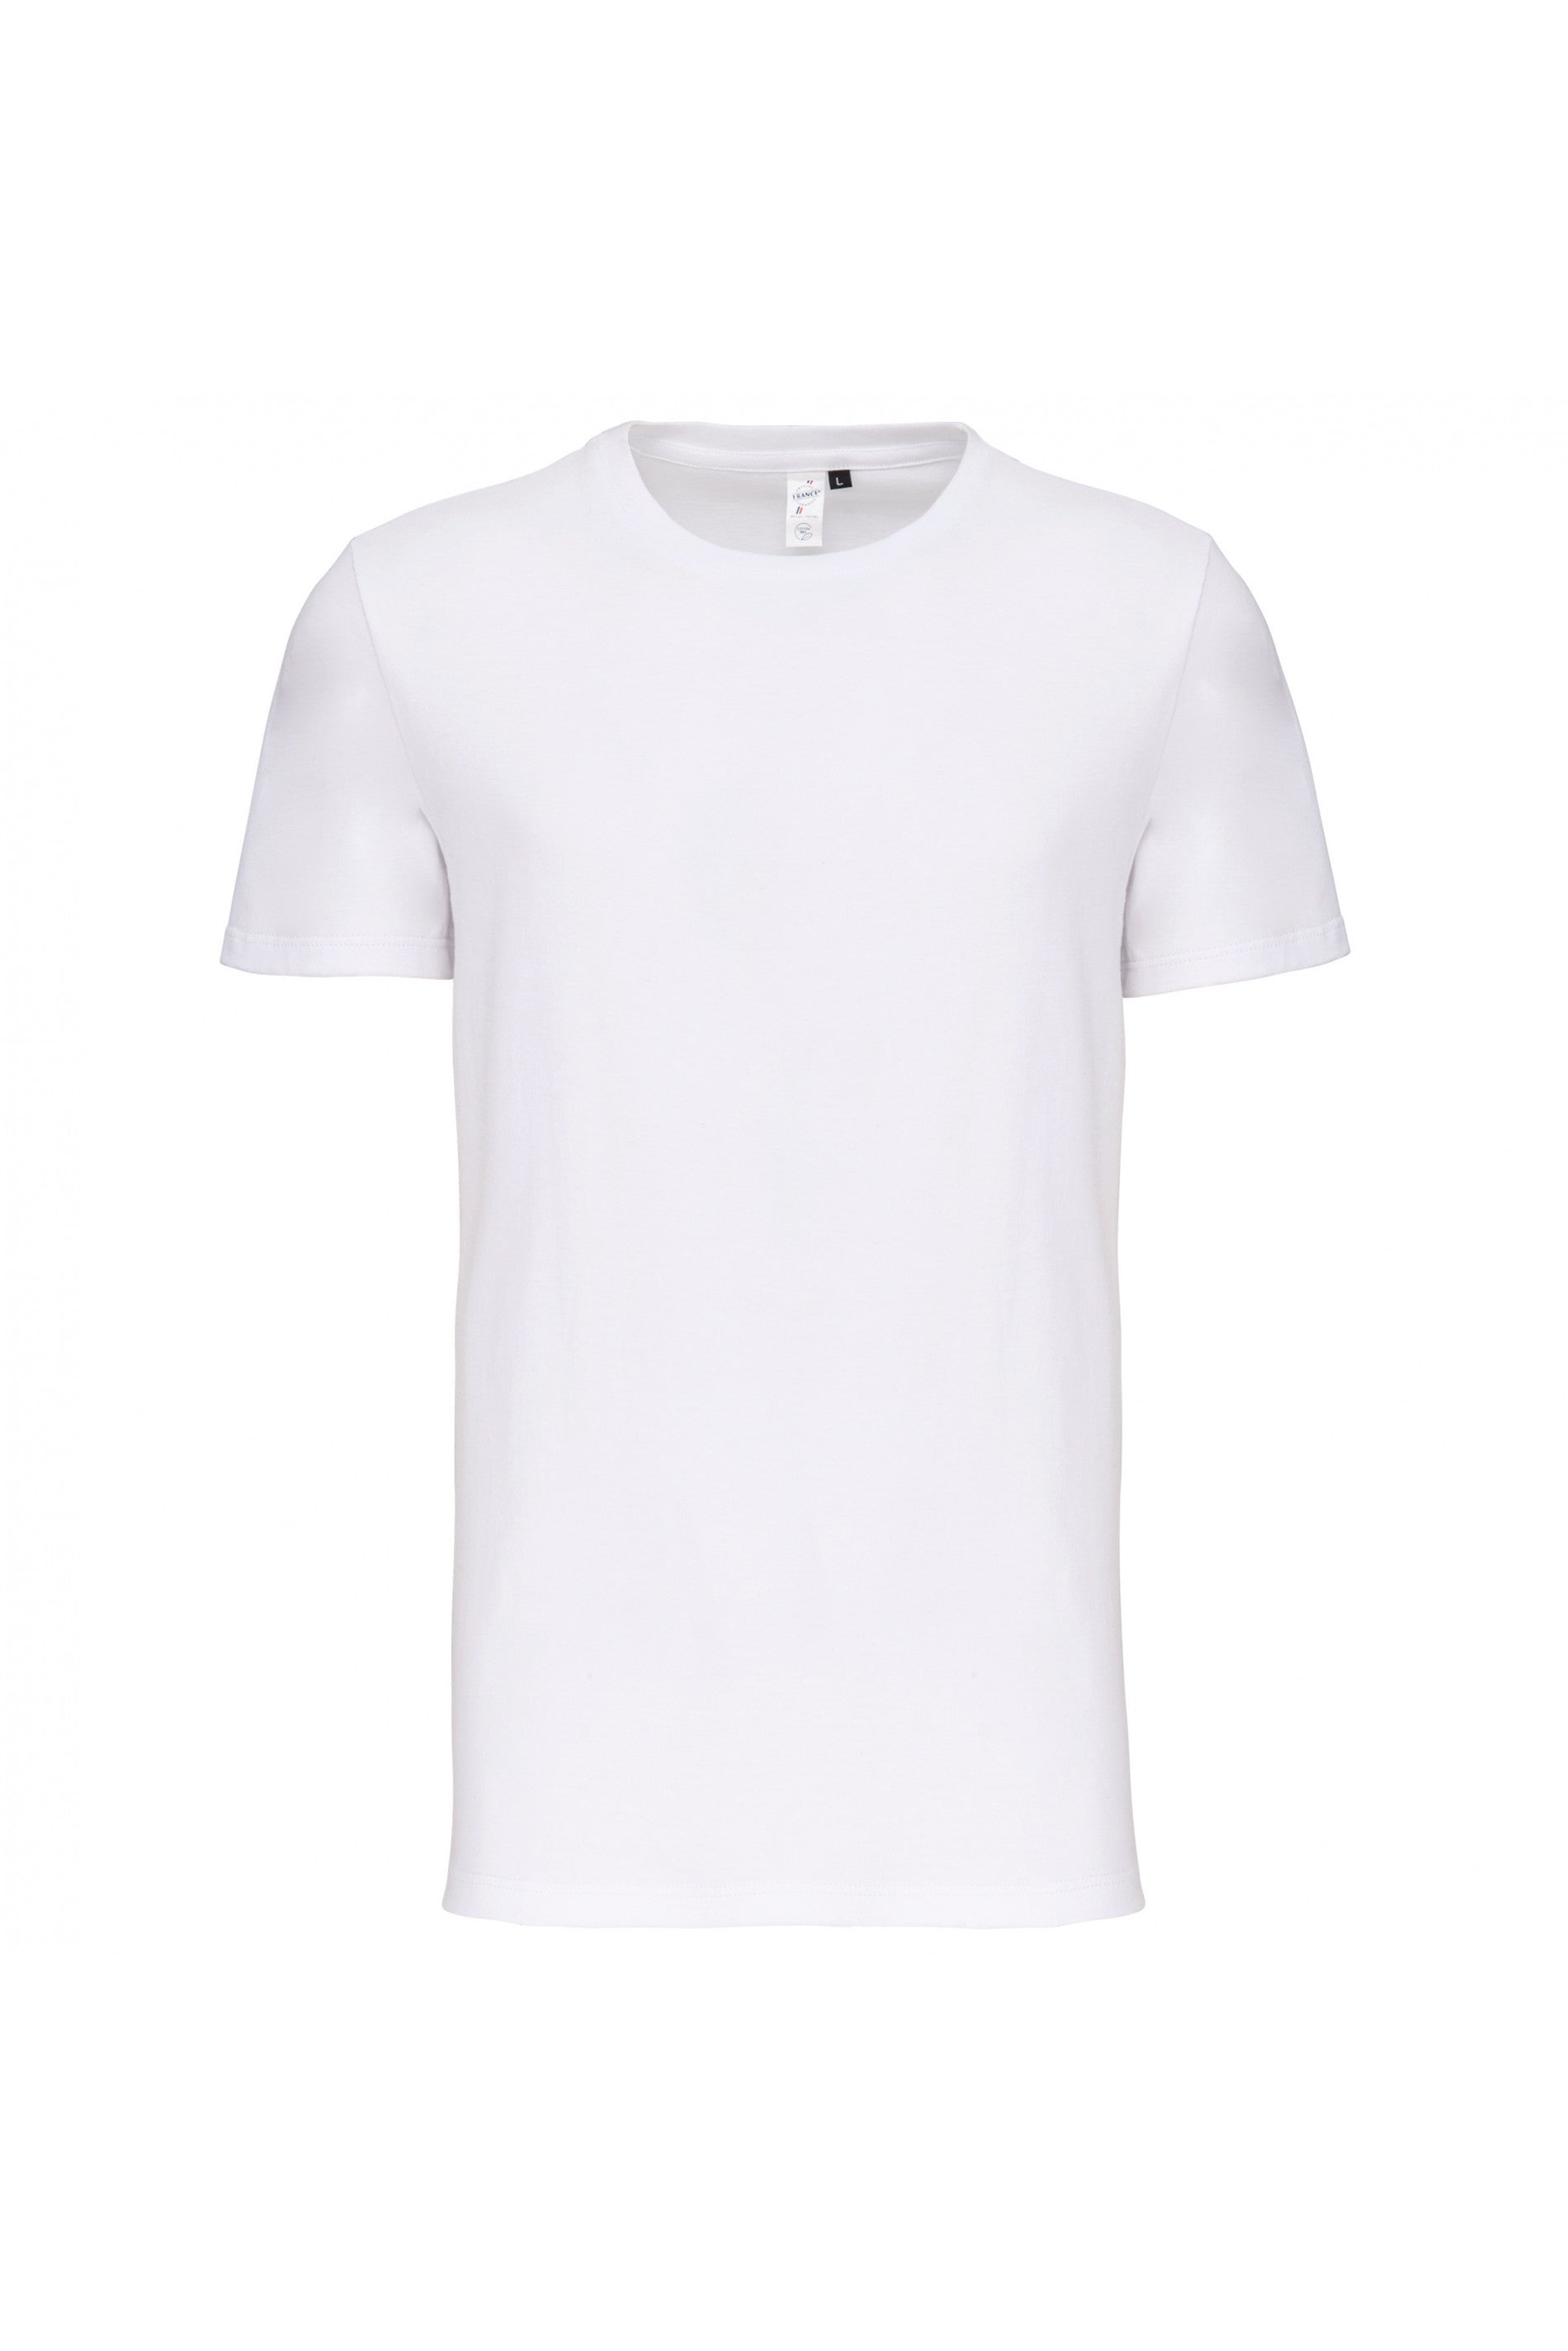 T-Shirt MADE IN FRANCE - Homme